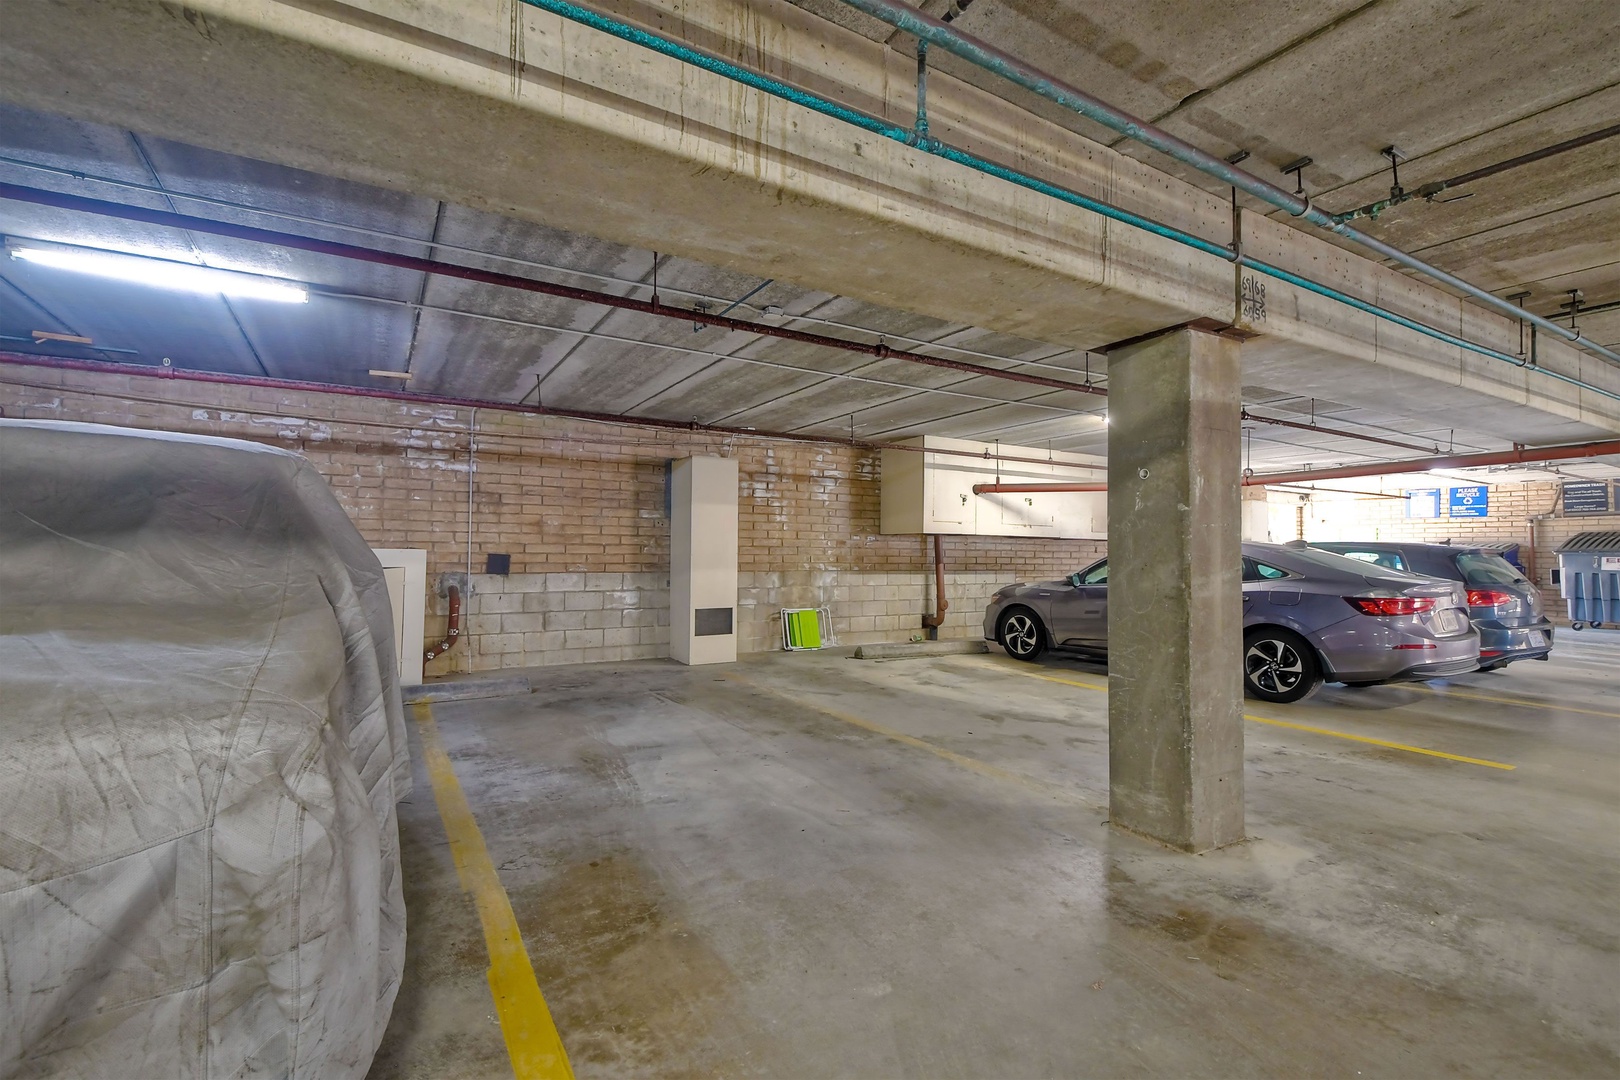 Dedicated parking is available for up to 1 vehicle in the garage